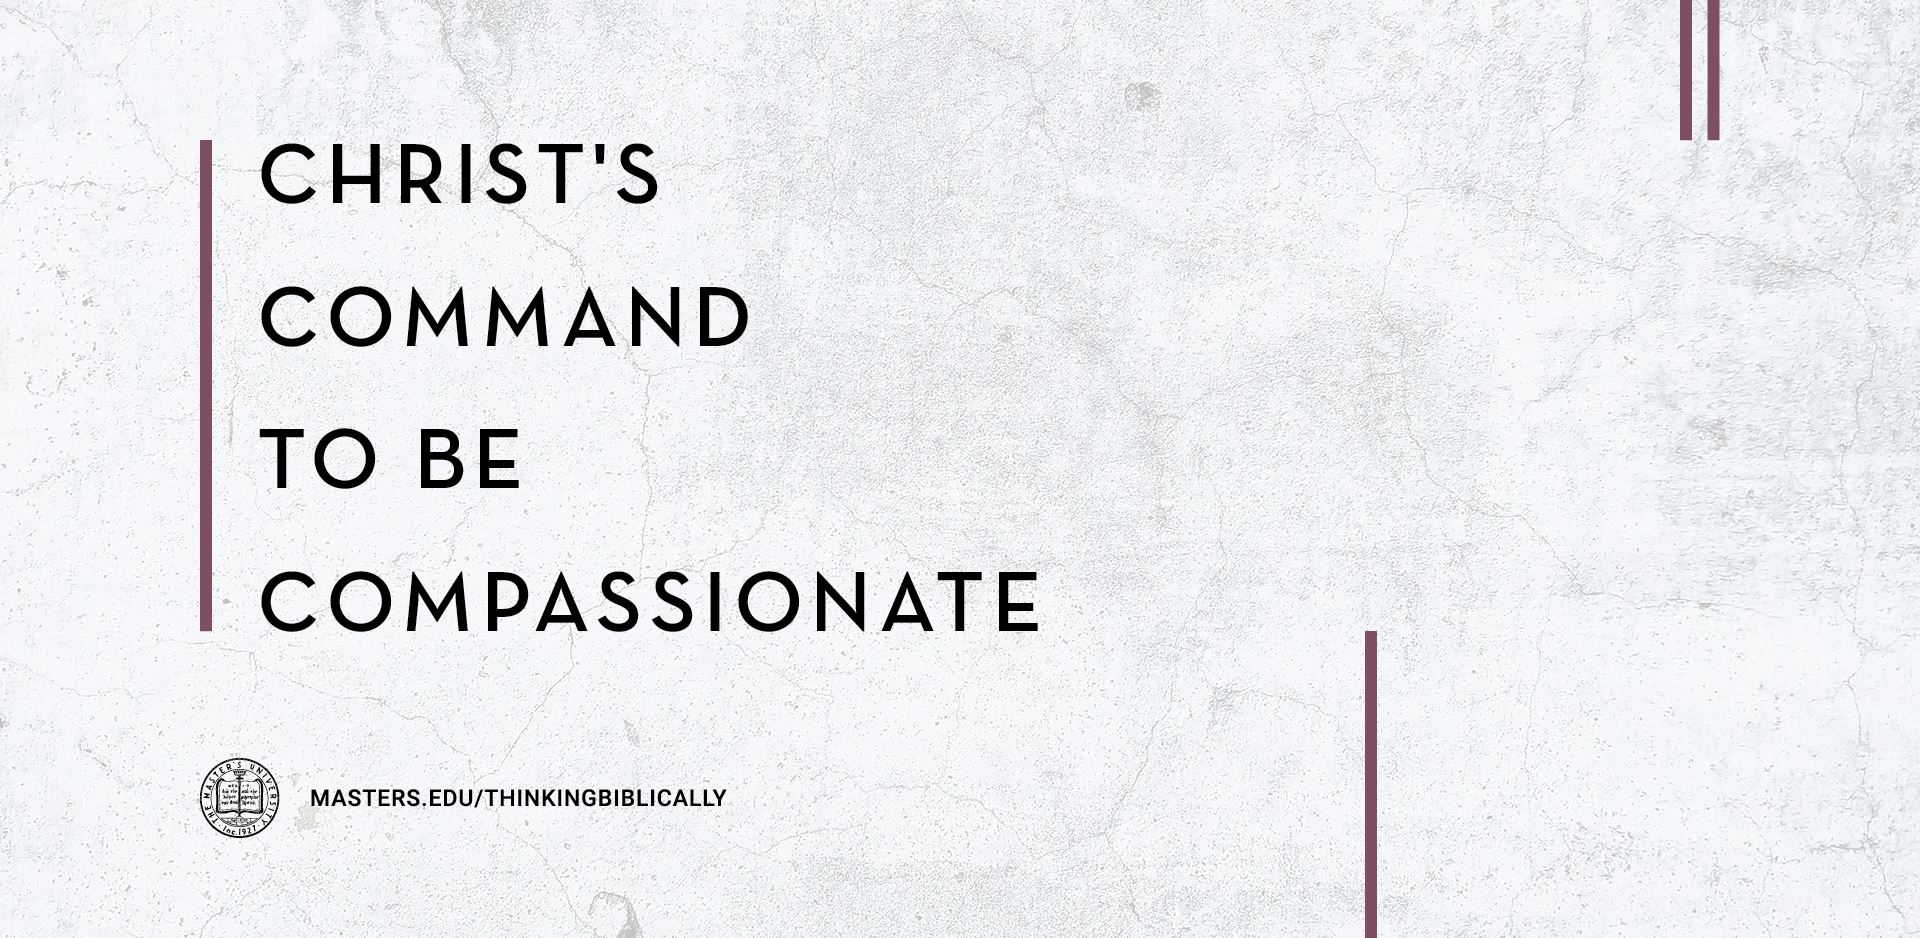 Christ’s Command to be Compassionate Featured Image